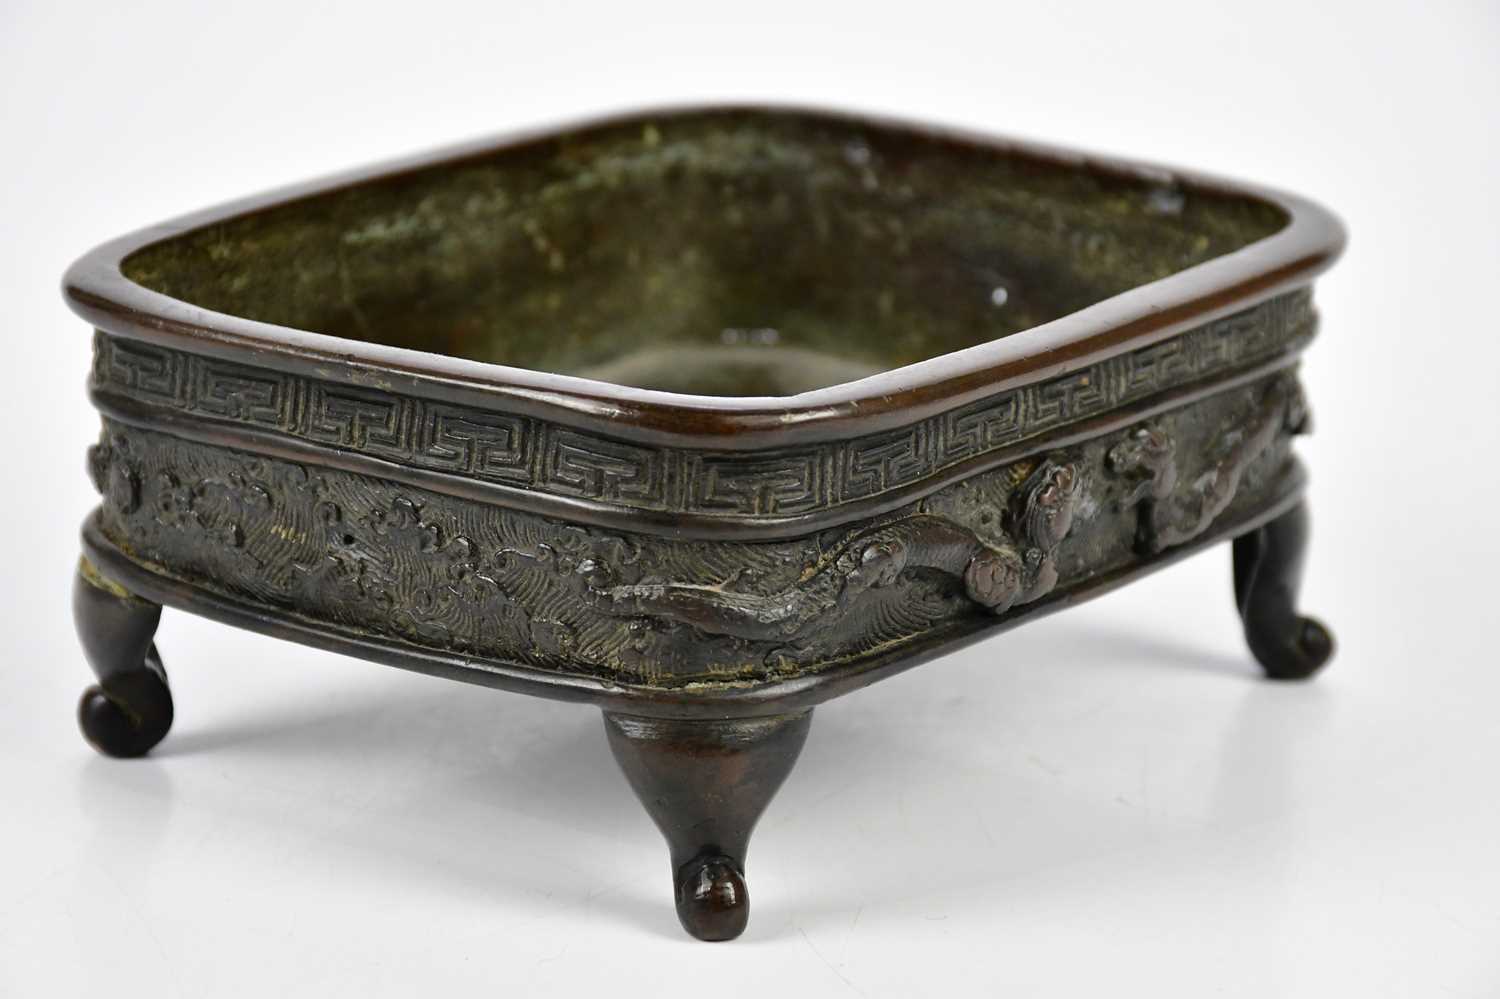 A late 19th century Japanese bronze bowl, with cast decoration of mythical beasts and Greek key - Image 3 of 7